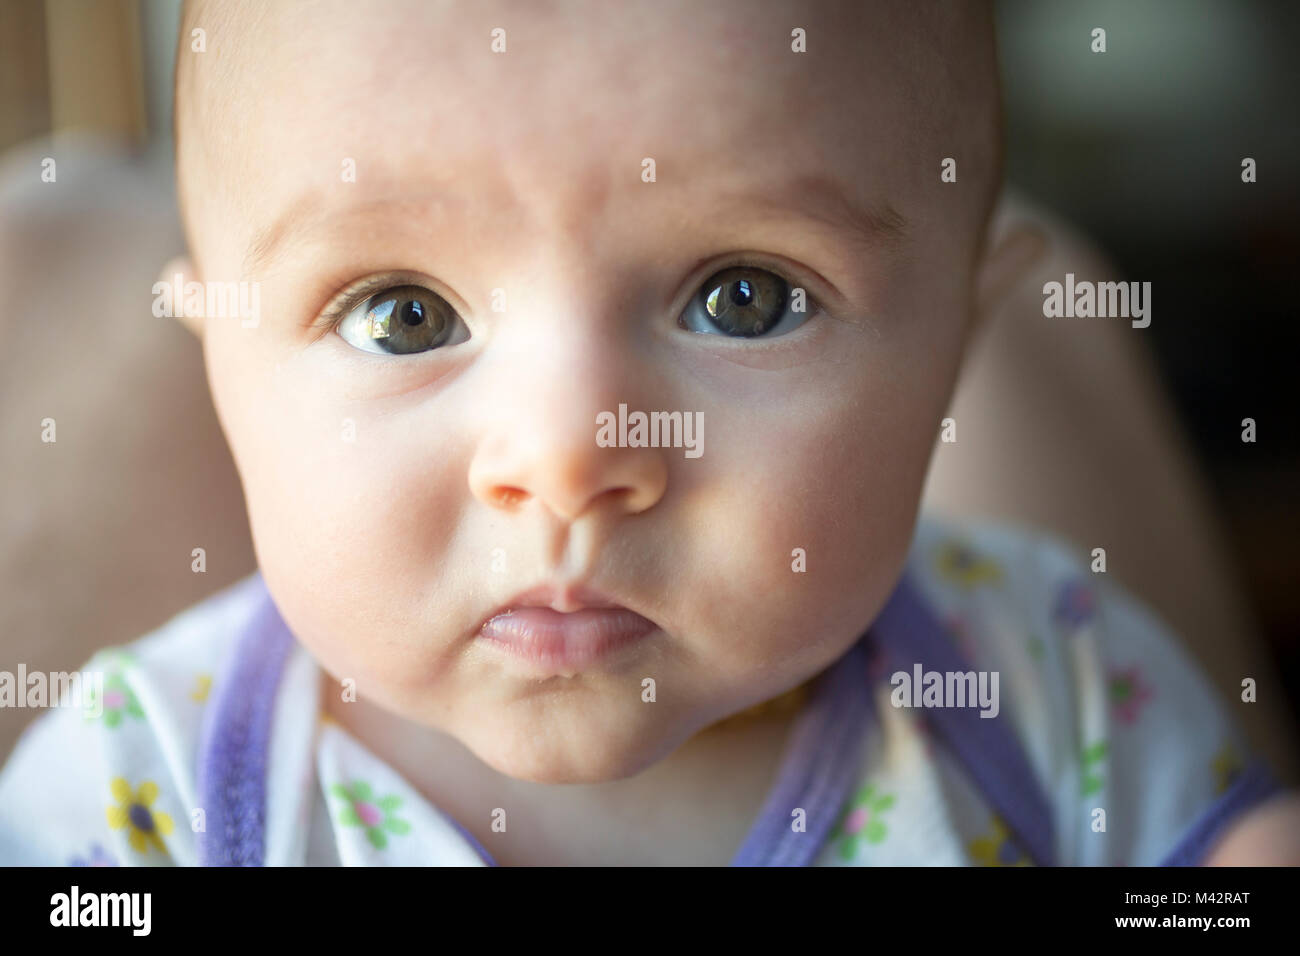 A newborn infant stares deeply with its big eyes. Stock Photo